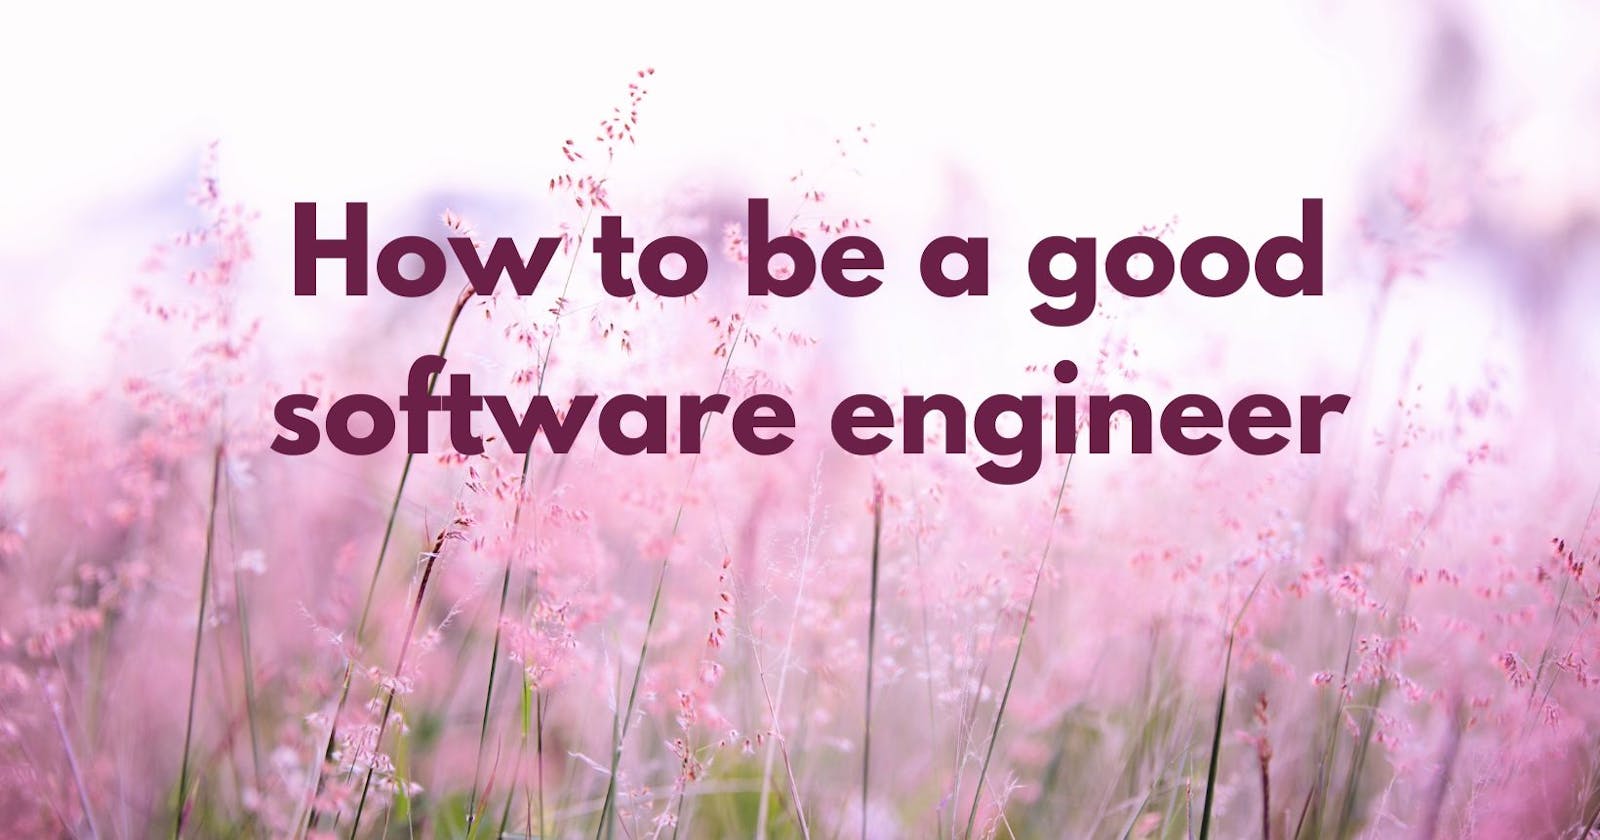 How to be a good software engineer